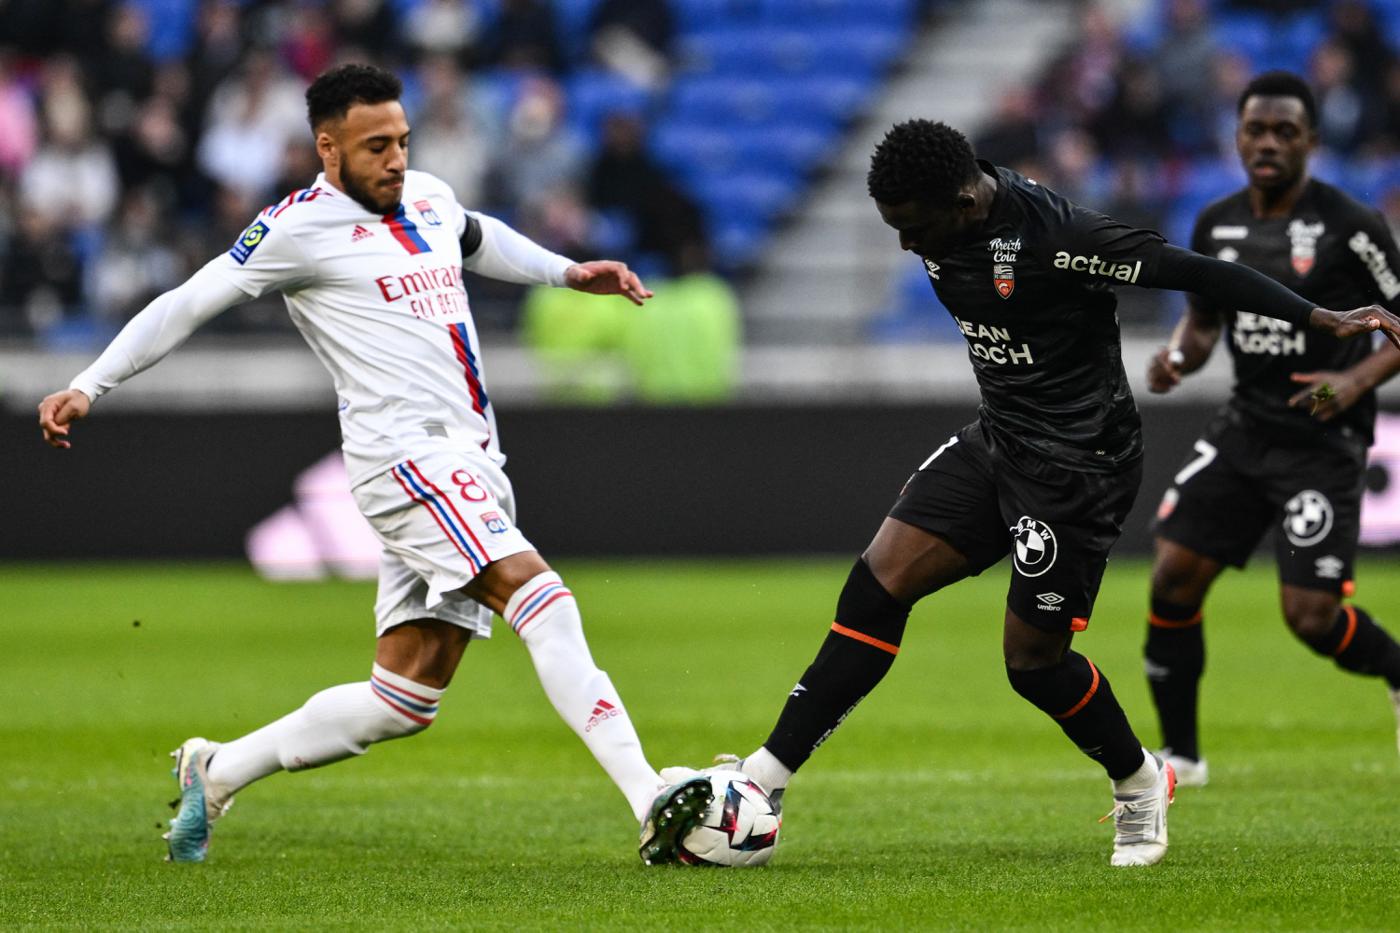 Lyon - Lorient - 0:0. French Championship, 26th round. Match review, statistics.